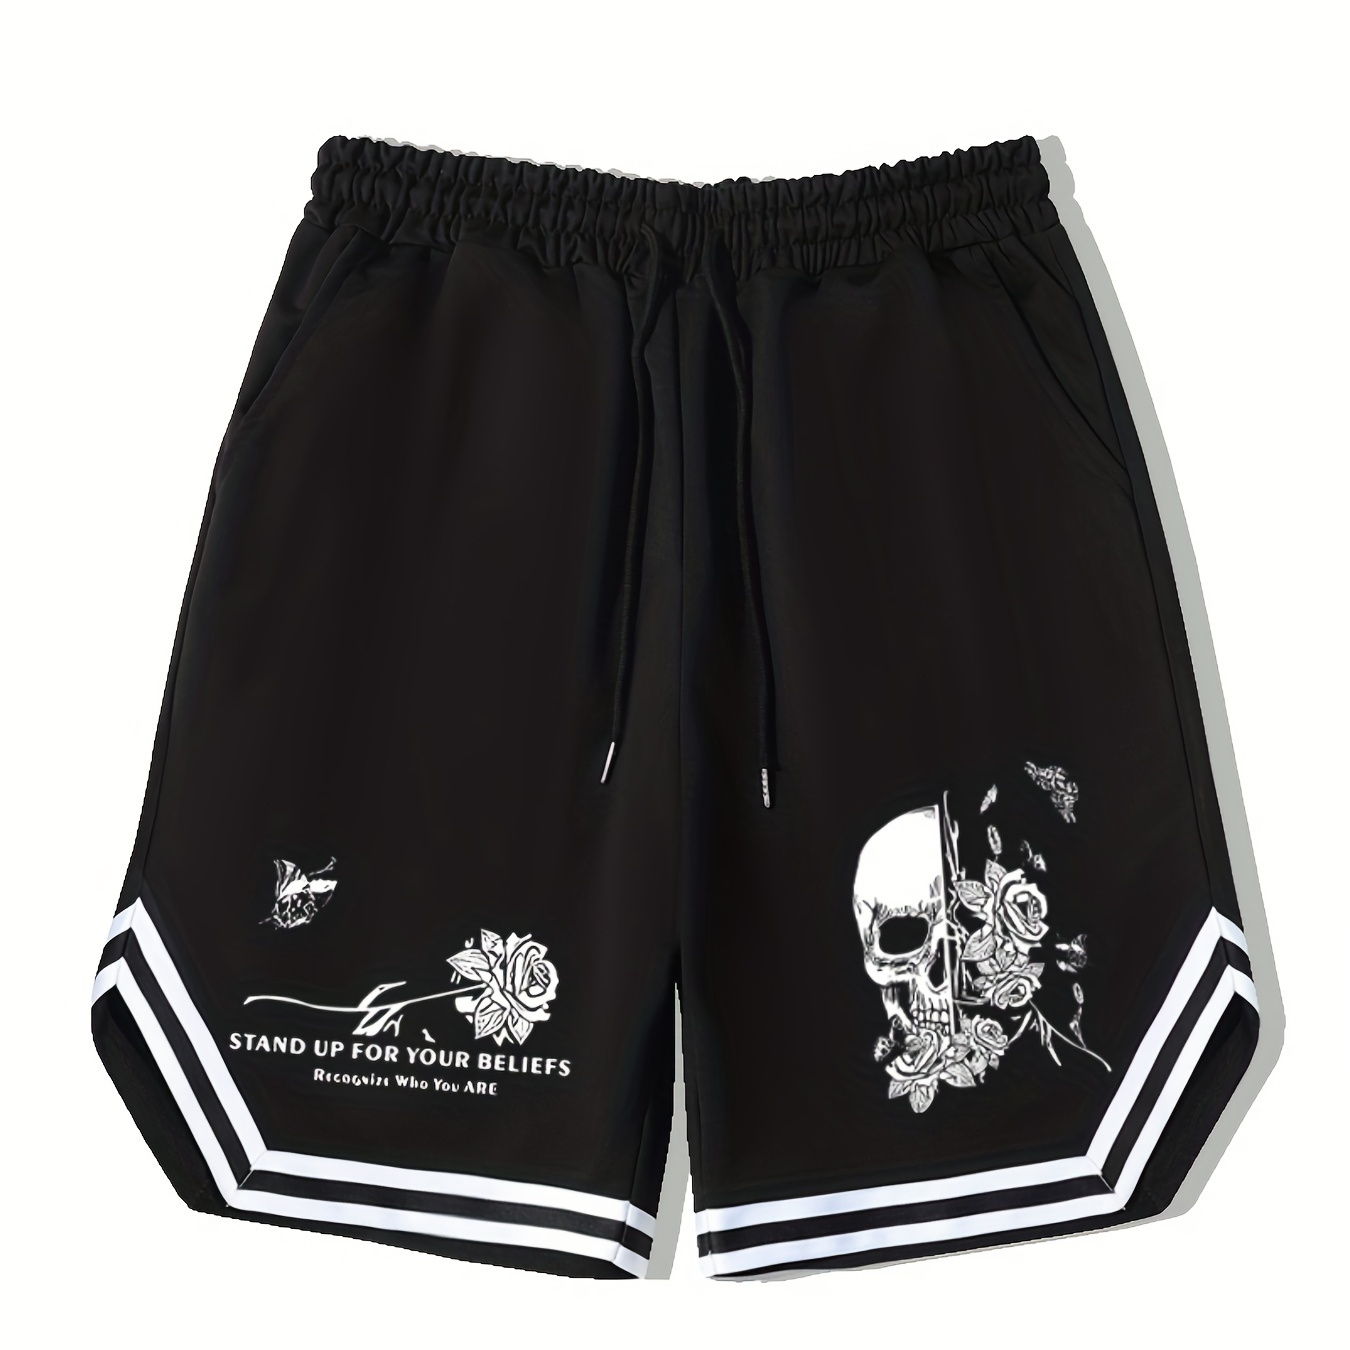 

Men's Streetwear Shorts, Flower Skull Graphic Drawstring Stretchy Short Pants For Comfort & Casual Chic Style, Summer Clothings Men's Fashion Outfits